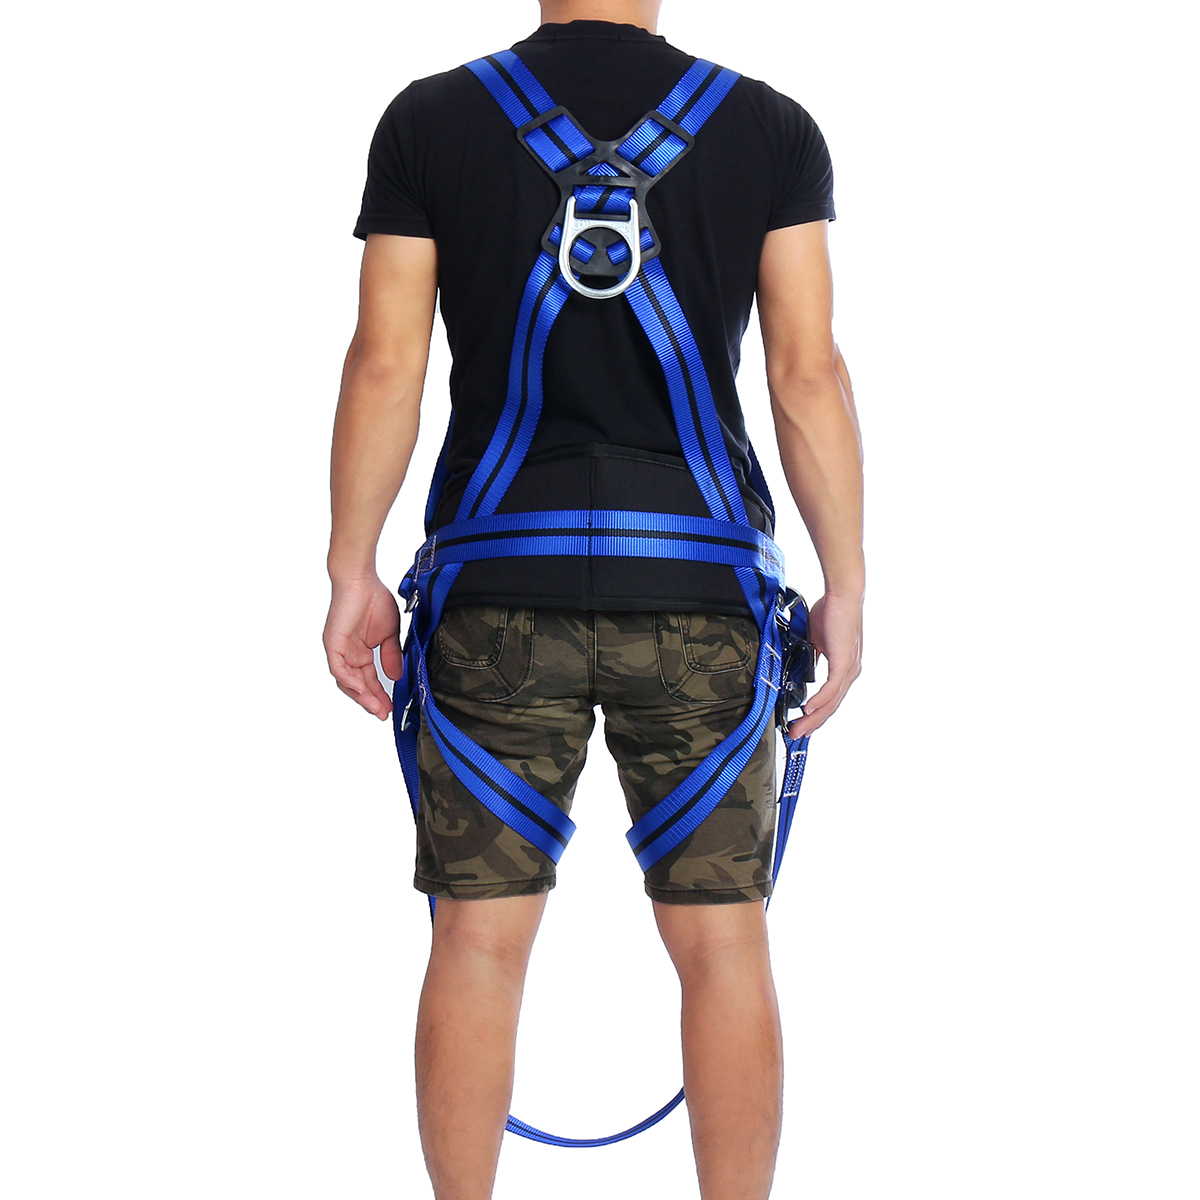 Outdoor-Camping-Climbing-Safety-Harness-Seat-Belt-Blue-Sitting-Rock-Climbing-Rappelling-Tool-Rock-Cl-1617556-5